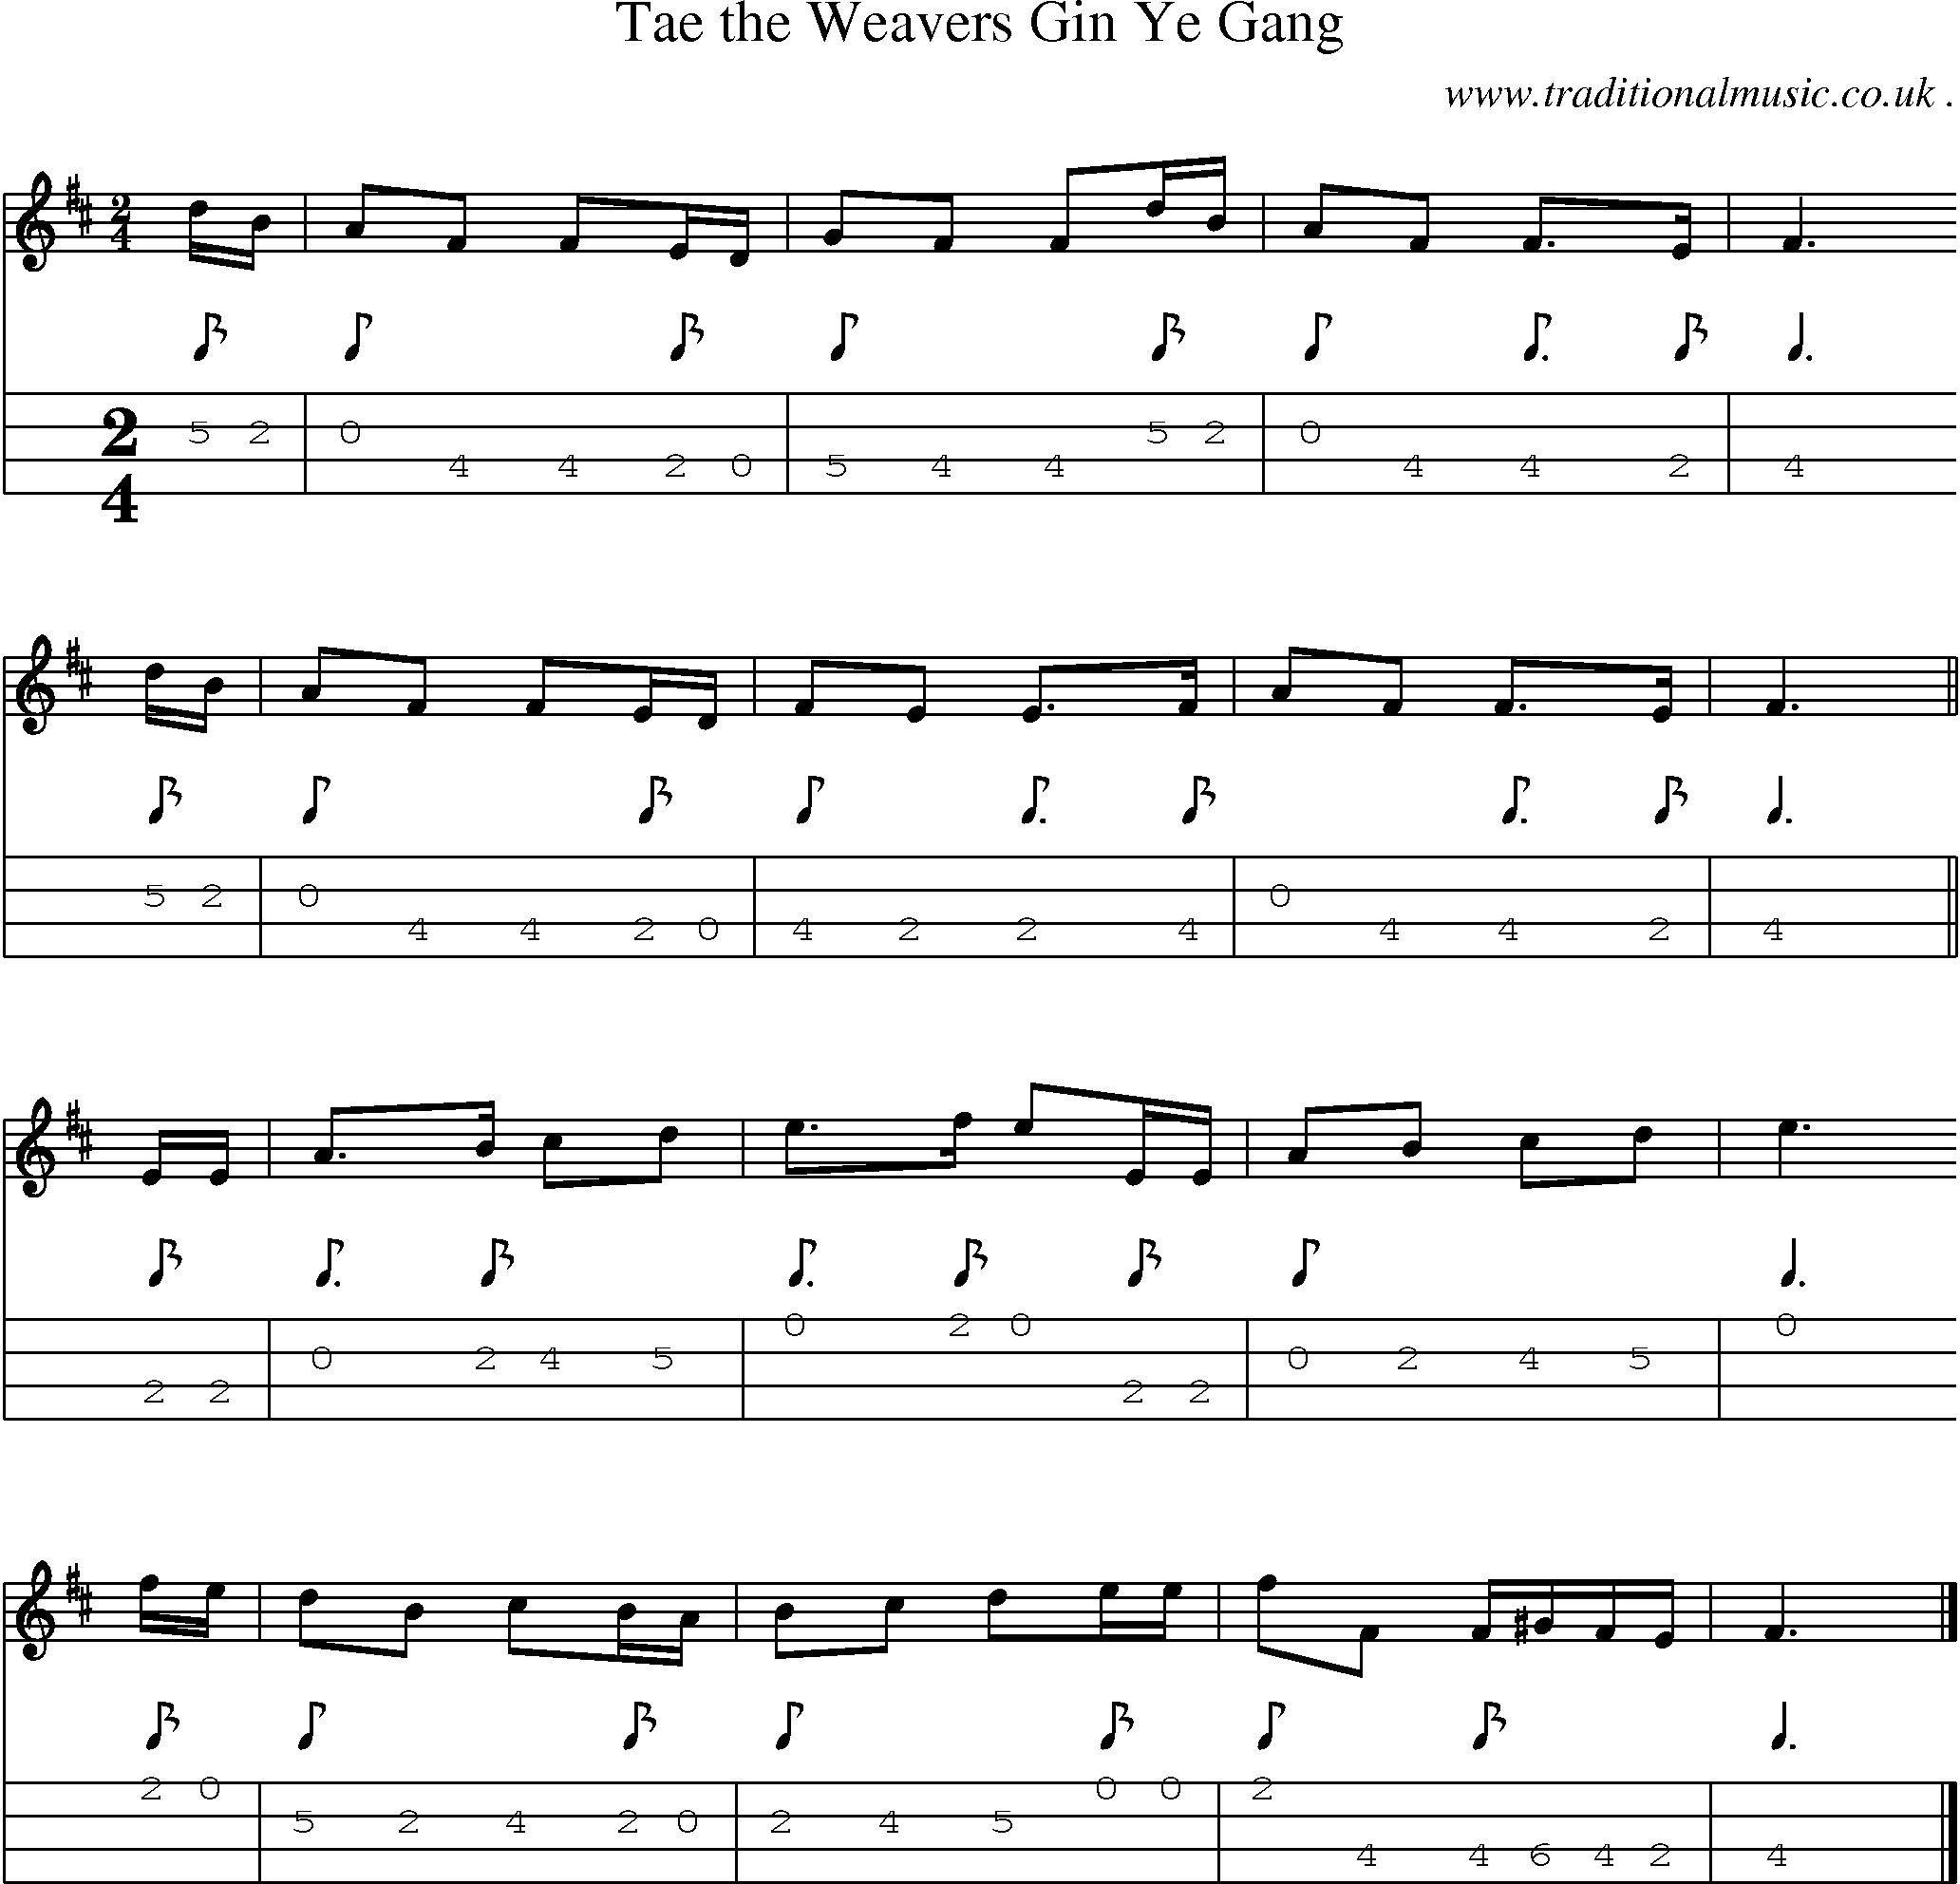 Sheet-music  score, Chords and Mandolin Tabs for Tae The Weavers Gin Ye Gang